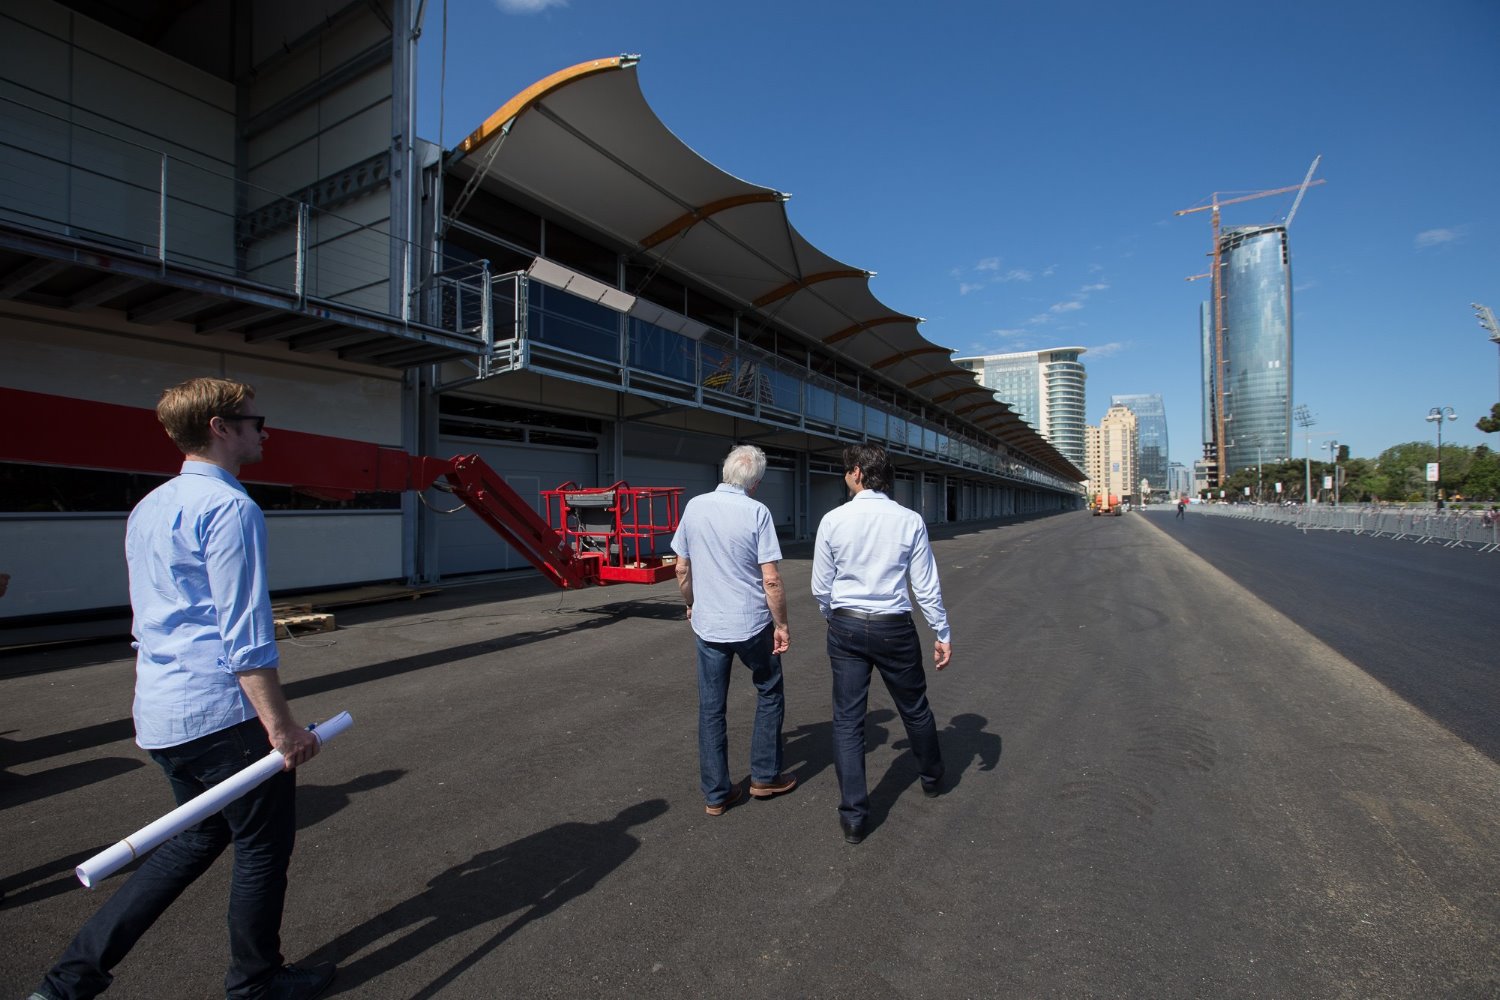 The Baku GP promoters are going to lose a lot of money